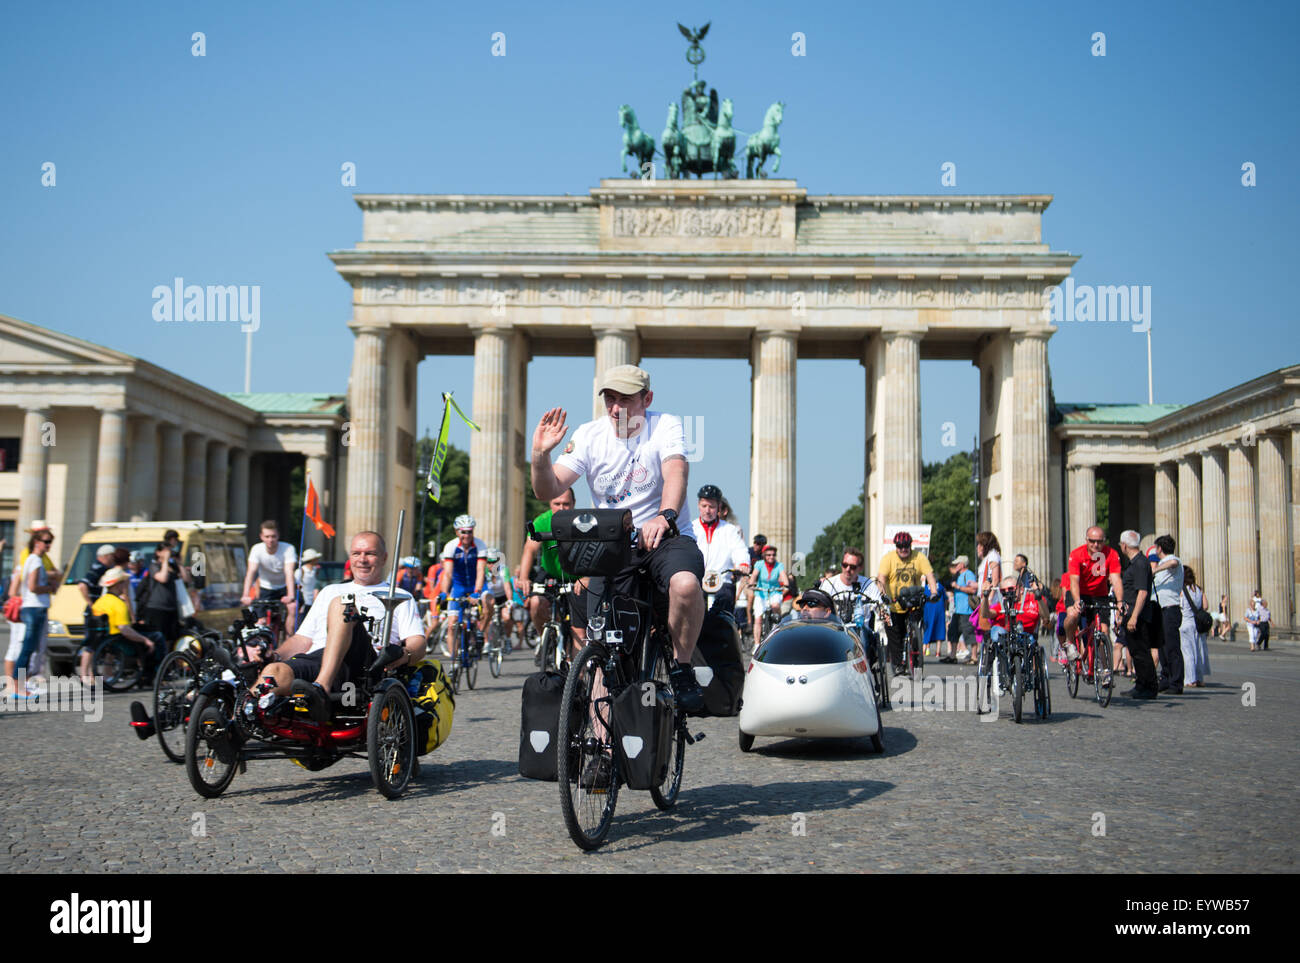 Amateur athletes Karl Grandt (L) from Flensburg and Sven Marx (C) from Berlin embark on their tour, with many people accompanying them on their bicycles, in front of the Brandenburg Gate during the bicycle event 'Inklusion braucht Aktion' (lit. inclusion needs action) in Berlin, Germany, 04 August 2015. With daily stages varying between 80 and 120 km, the 2,700 km tour will take the two men through various European cities and countries such as Flensburg, Berlin, Poland, the Czech Republic, Munich and Austria. Their final destination will be Rome, Italy, where they will have an audience with th Stock Photo